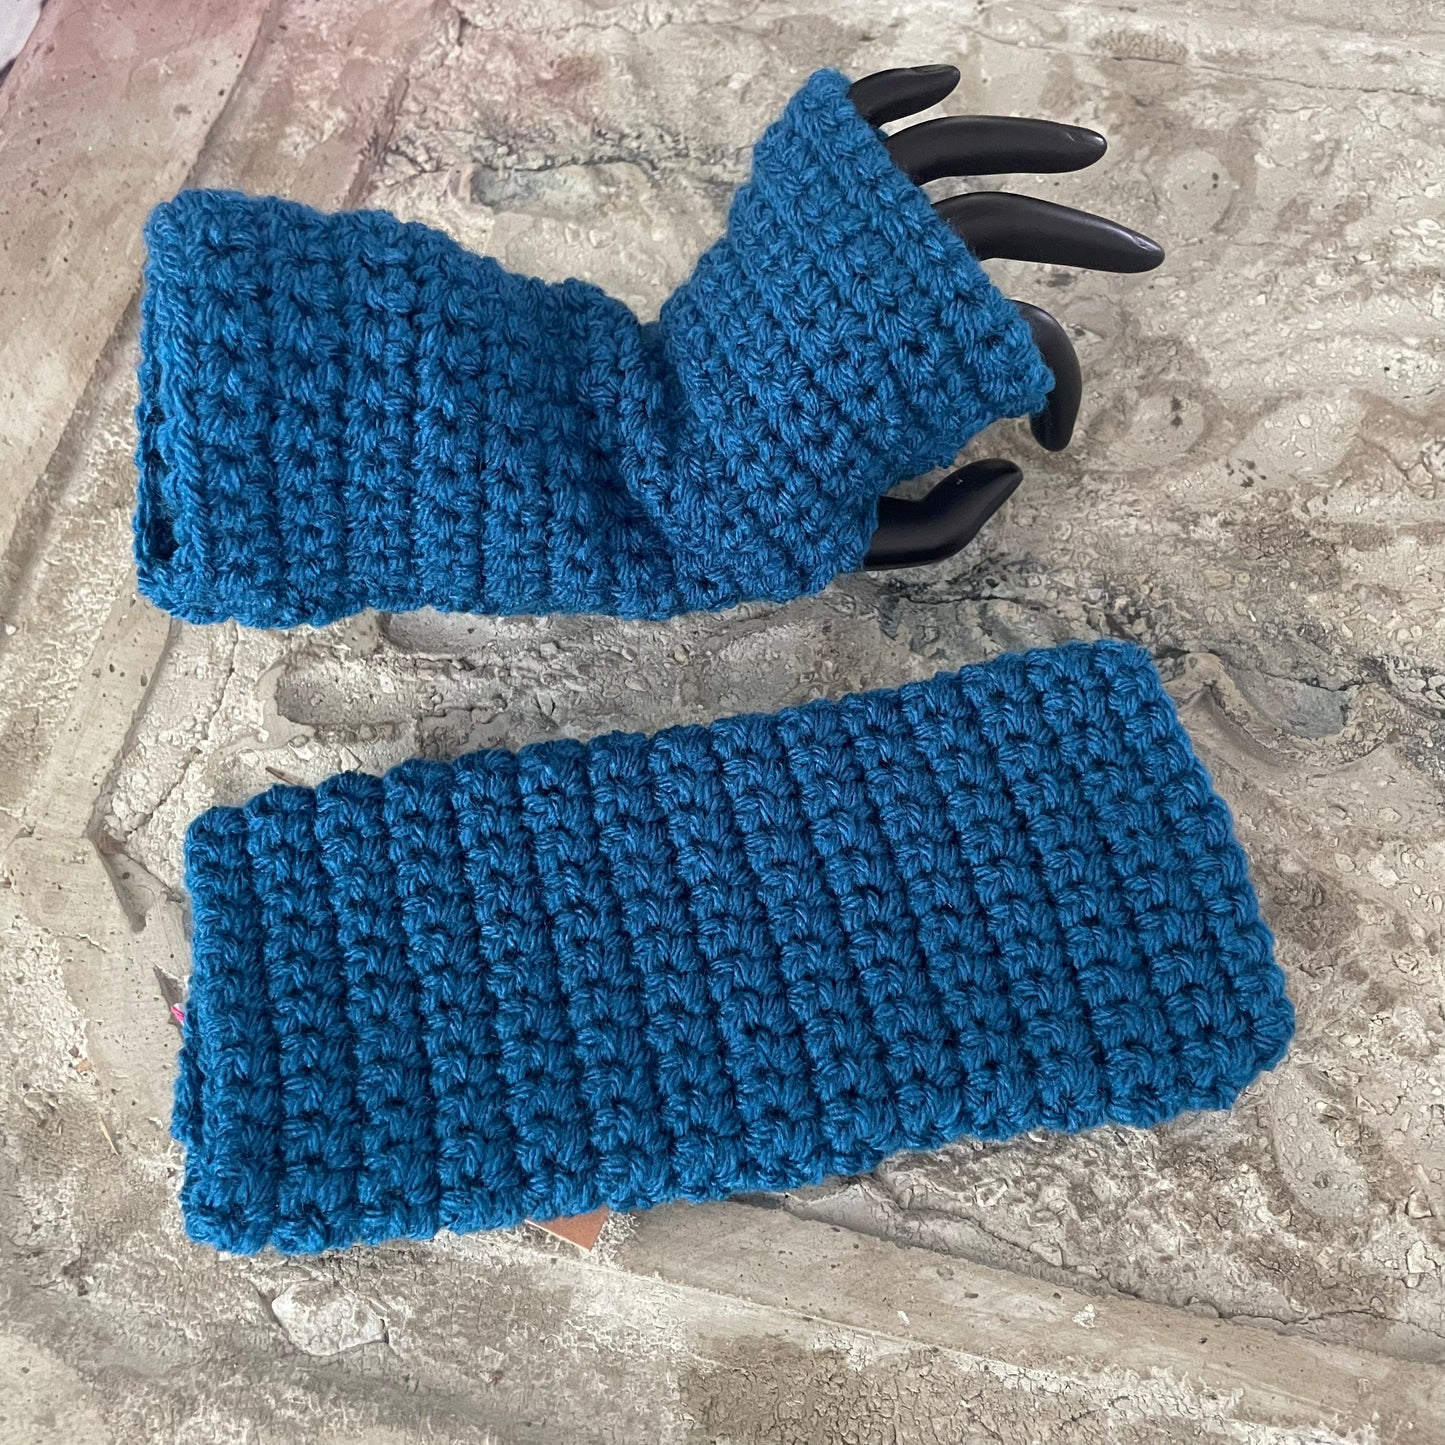 Sapphire Blue Writing Tech Fingerless Gloves Crochet Knit Gaming Texting Wrist Warmers Solid Color